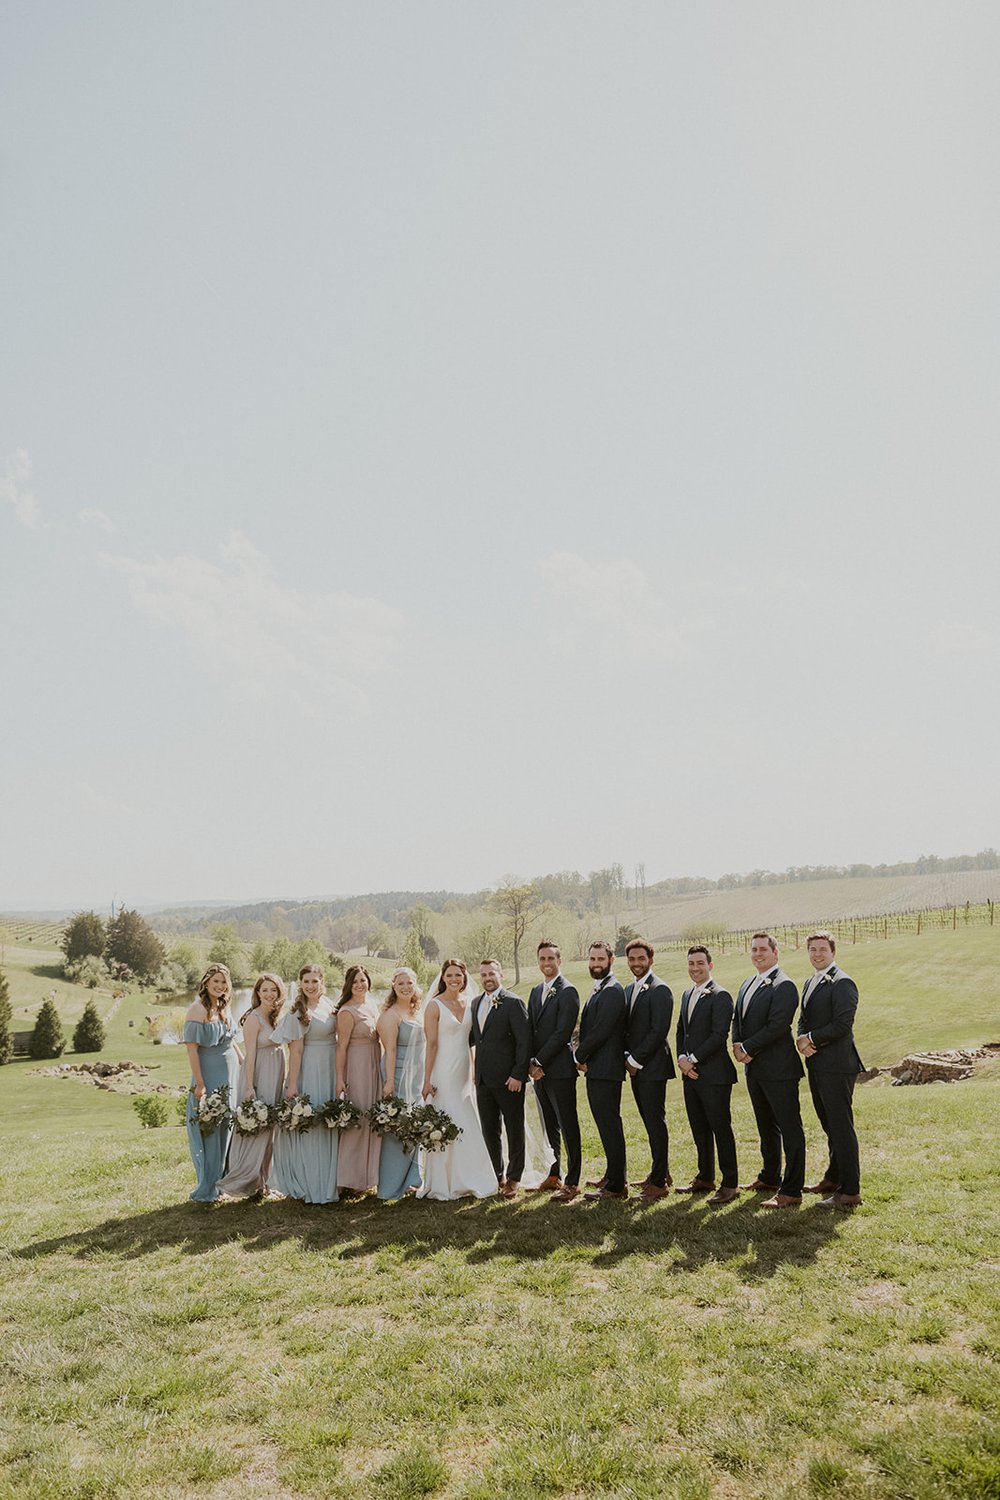 Entire wedding party with rolling hill backdrop.